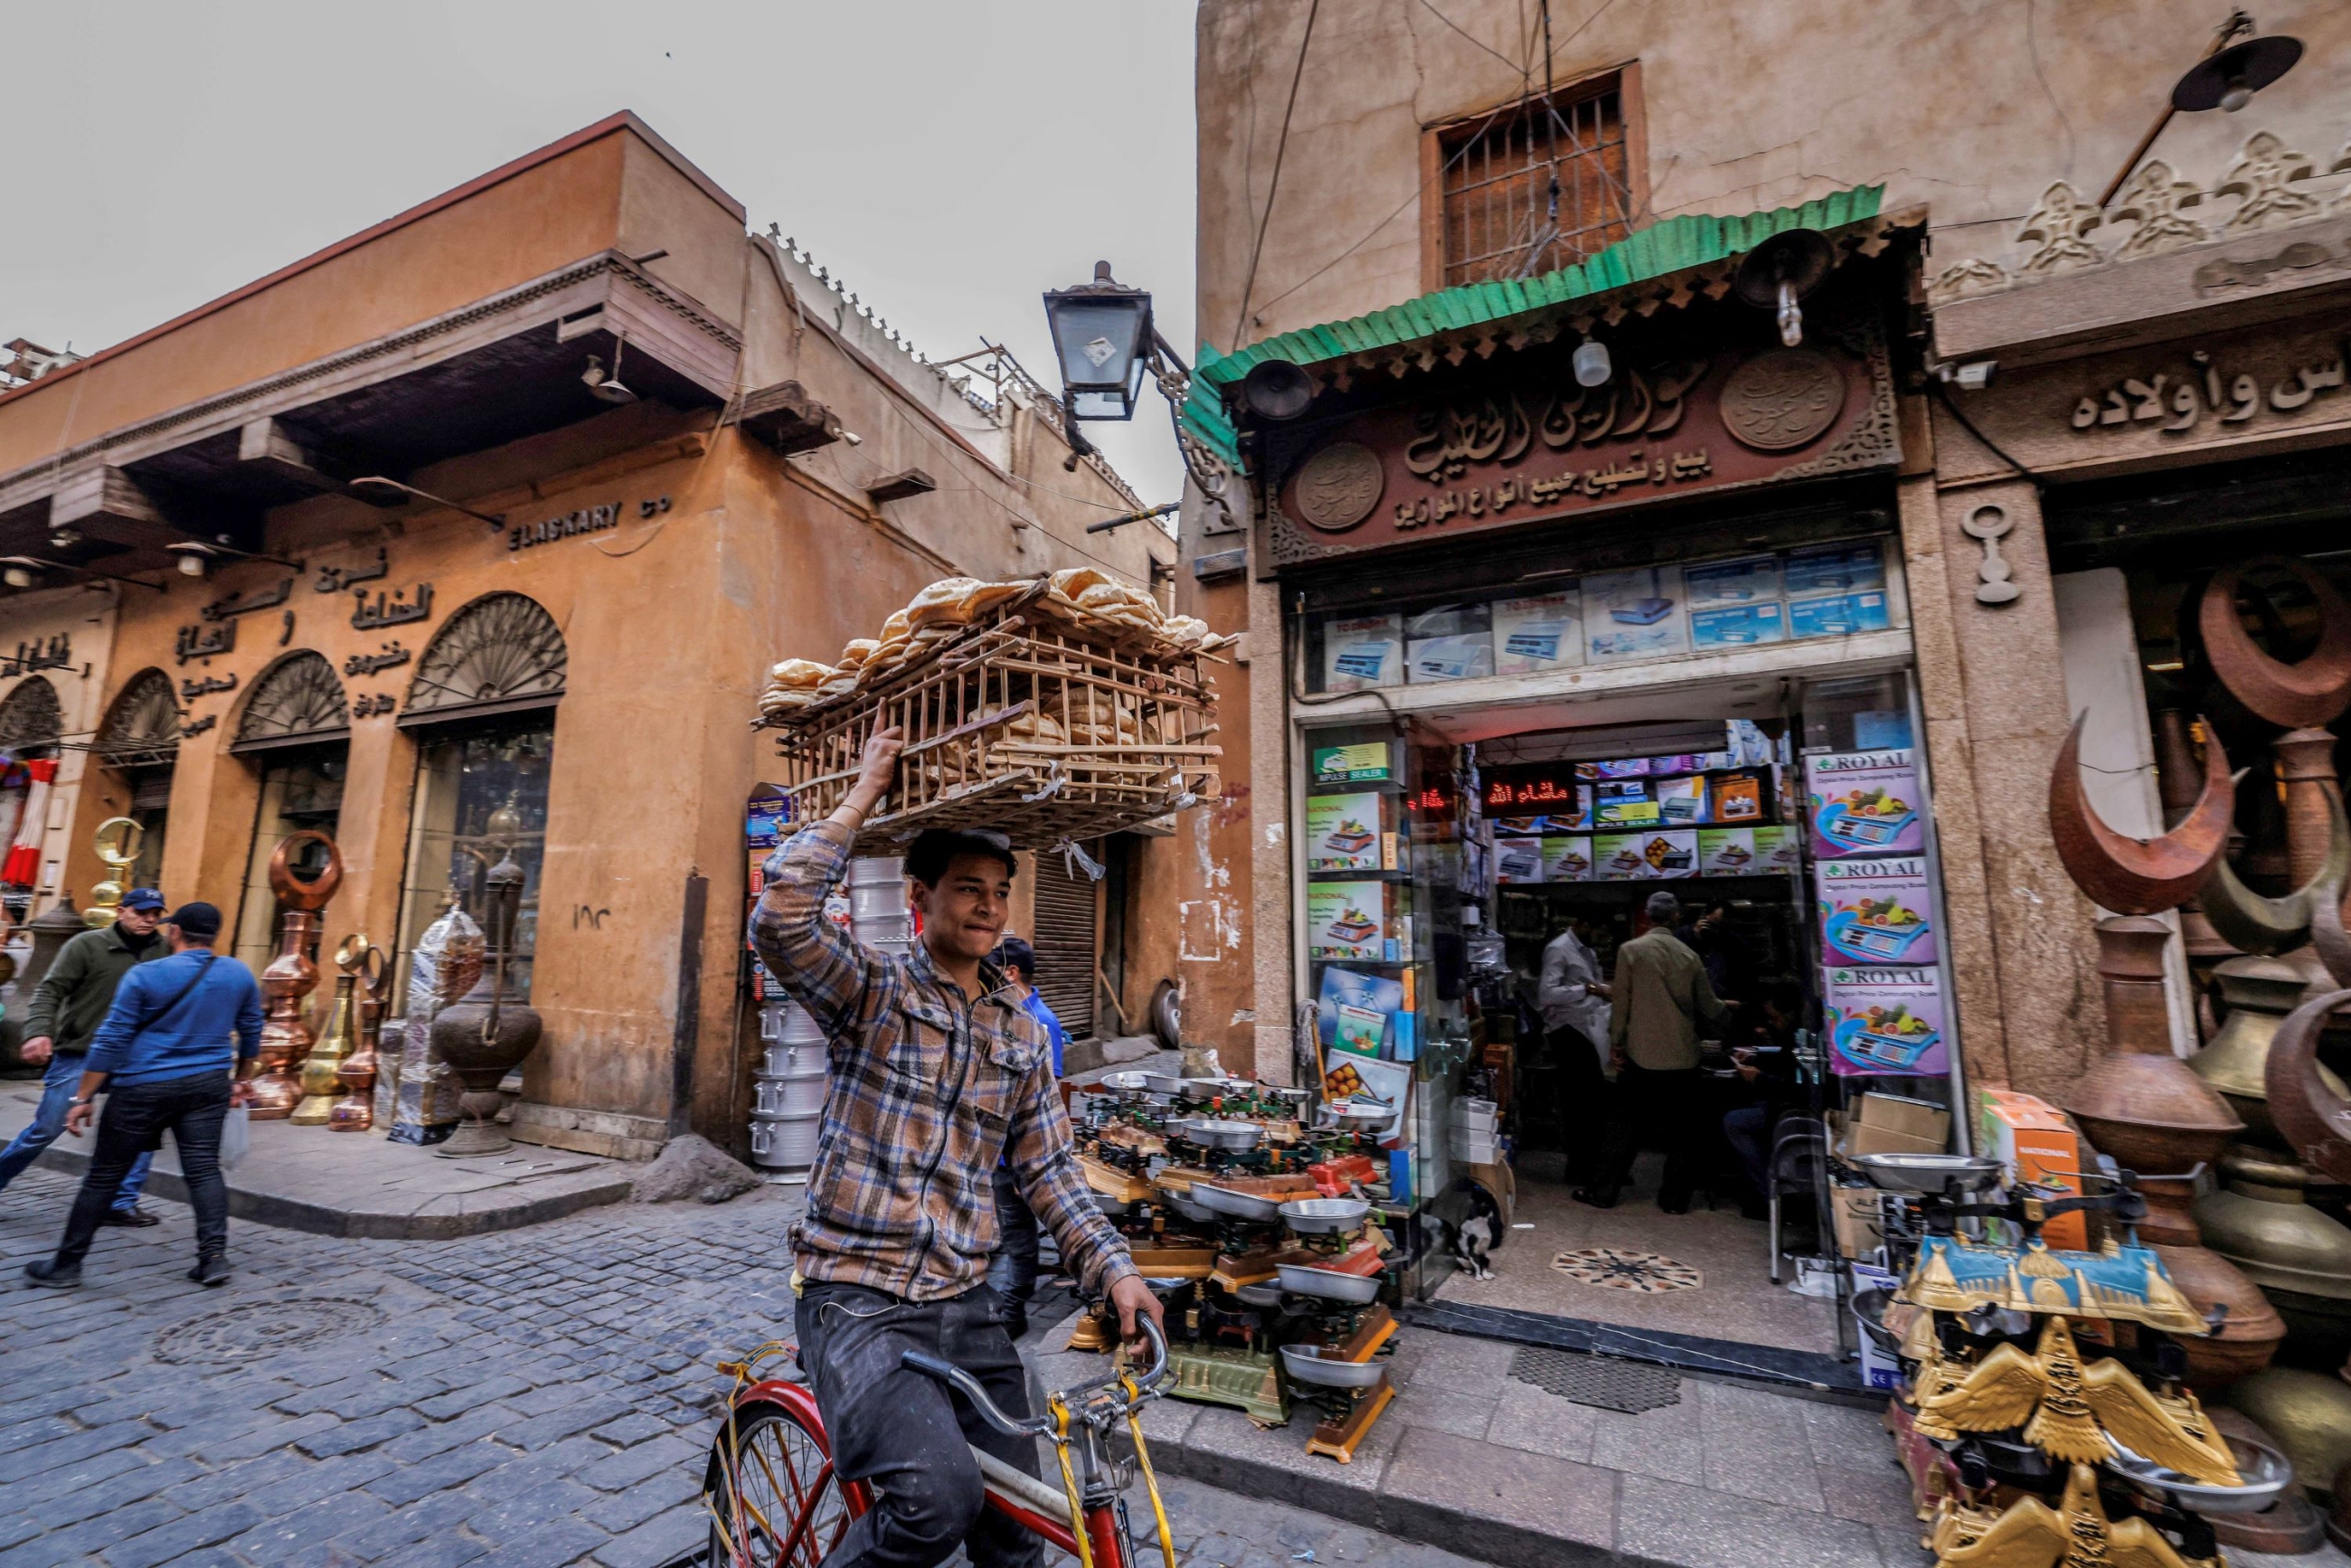 A deliveryman balances a load of bread on his head as he cycles through the old quarters of Cairo